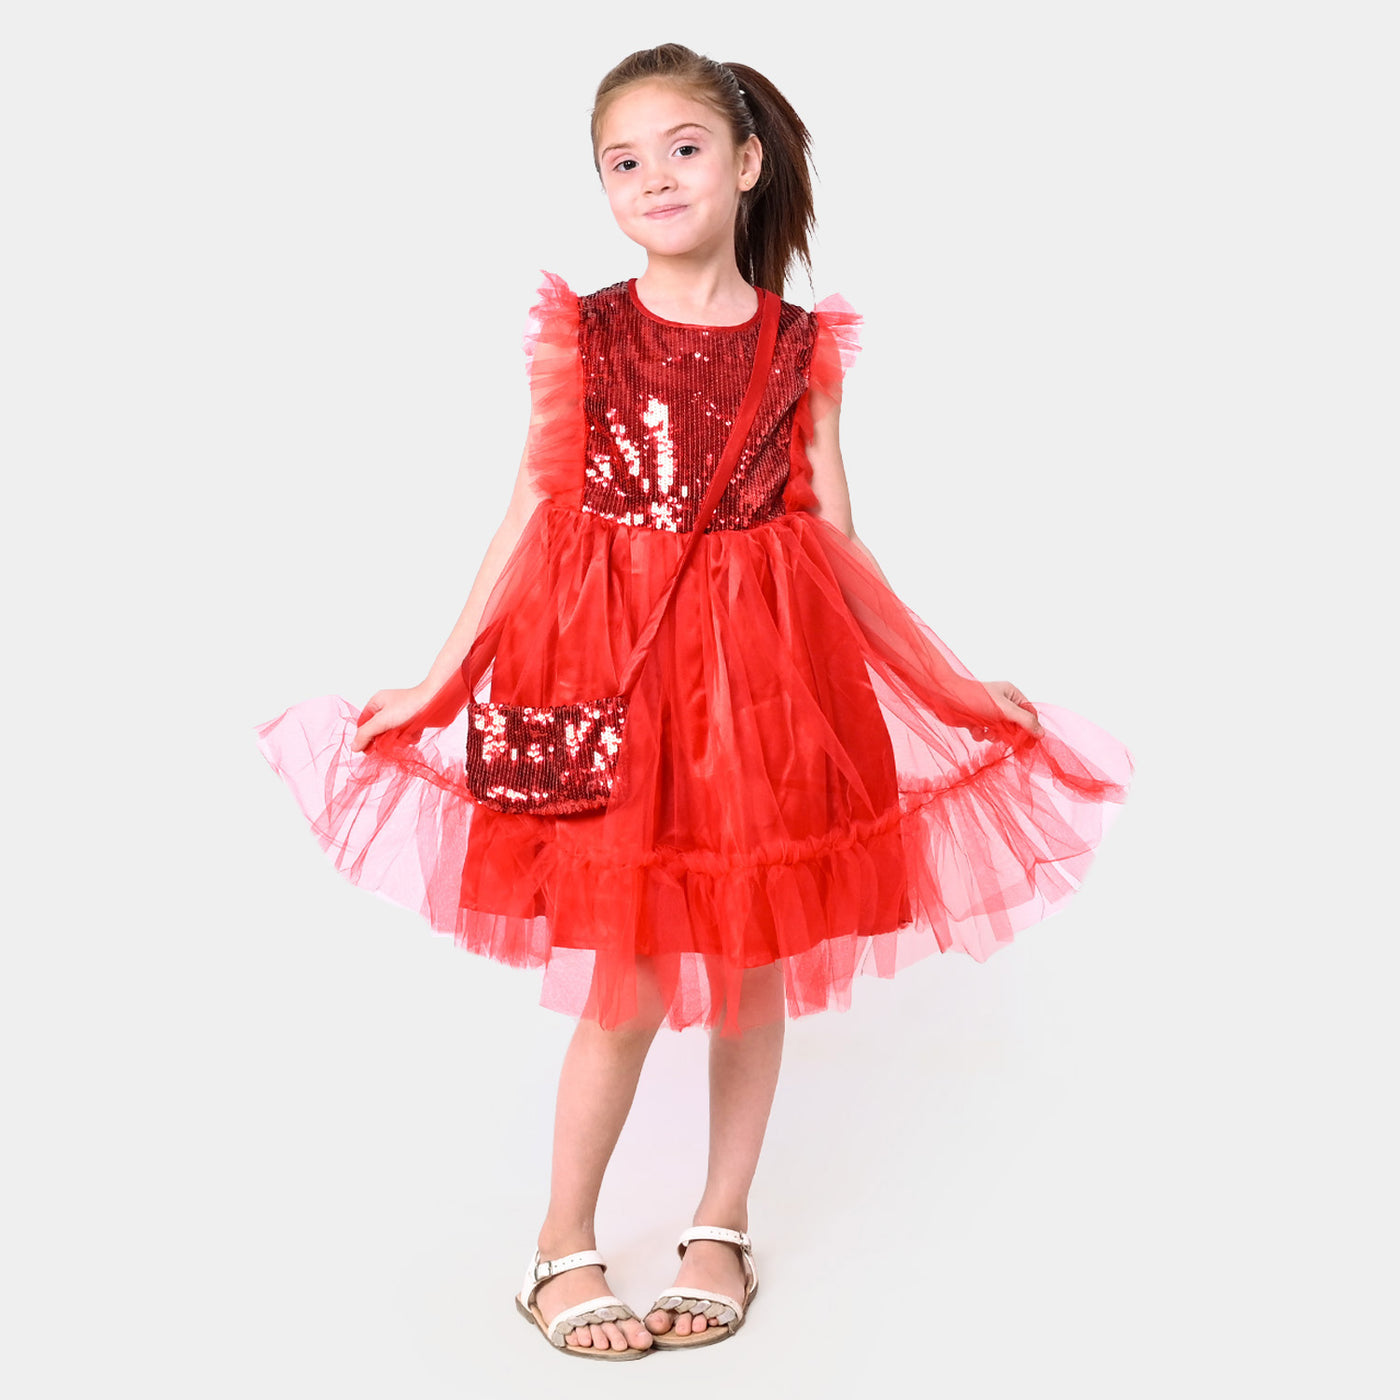 Girls Fancy Sequence Frock Rose Marie - Red